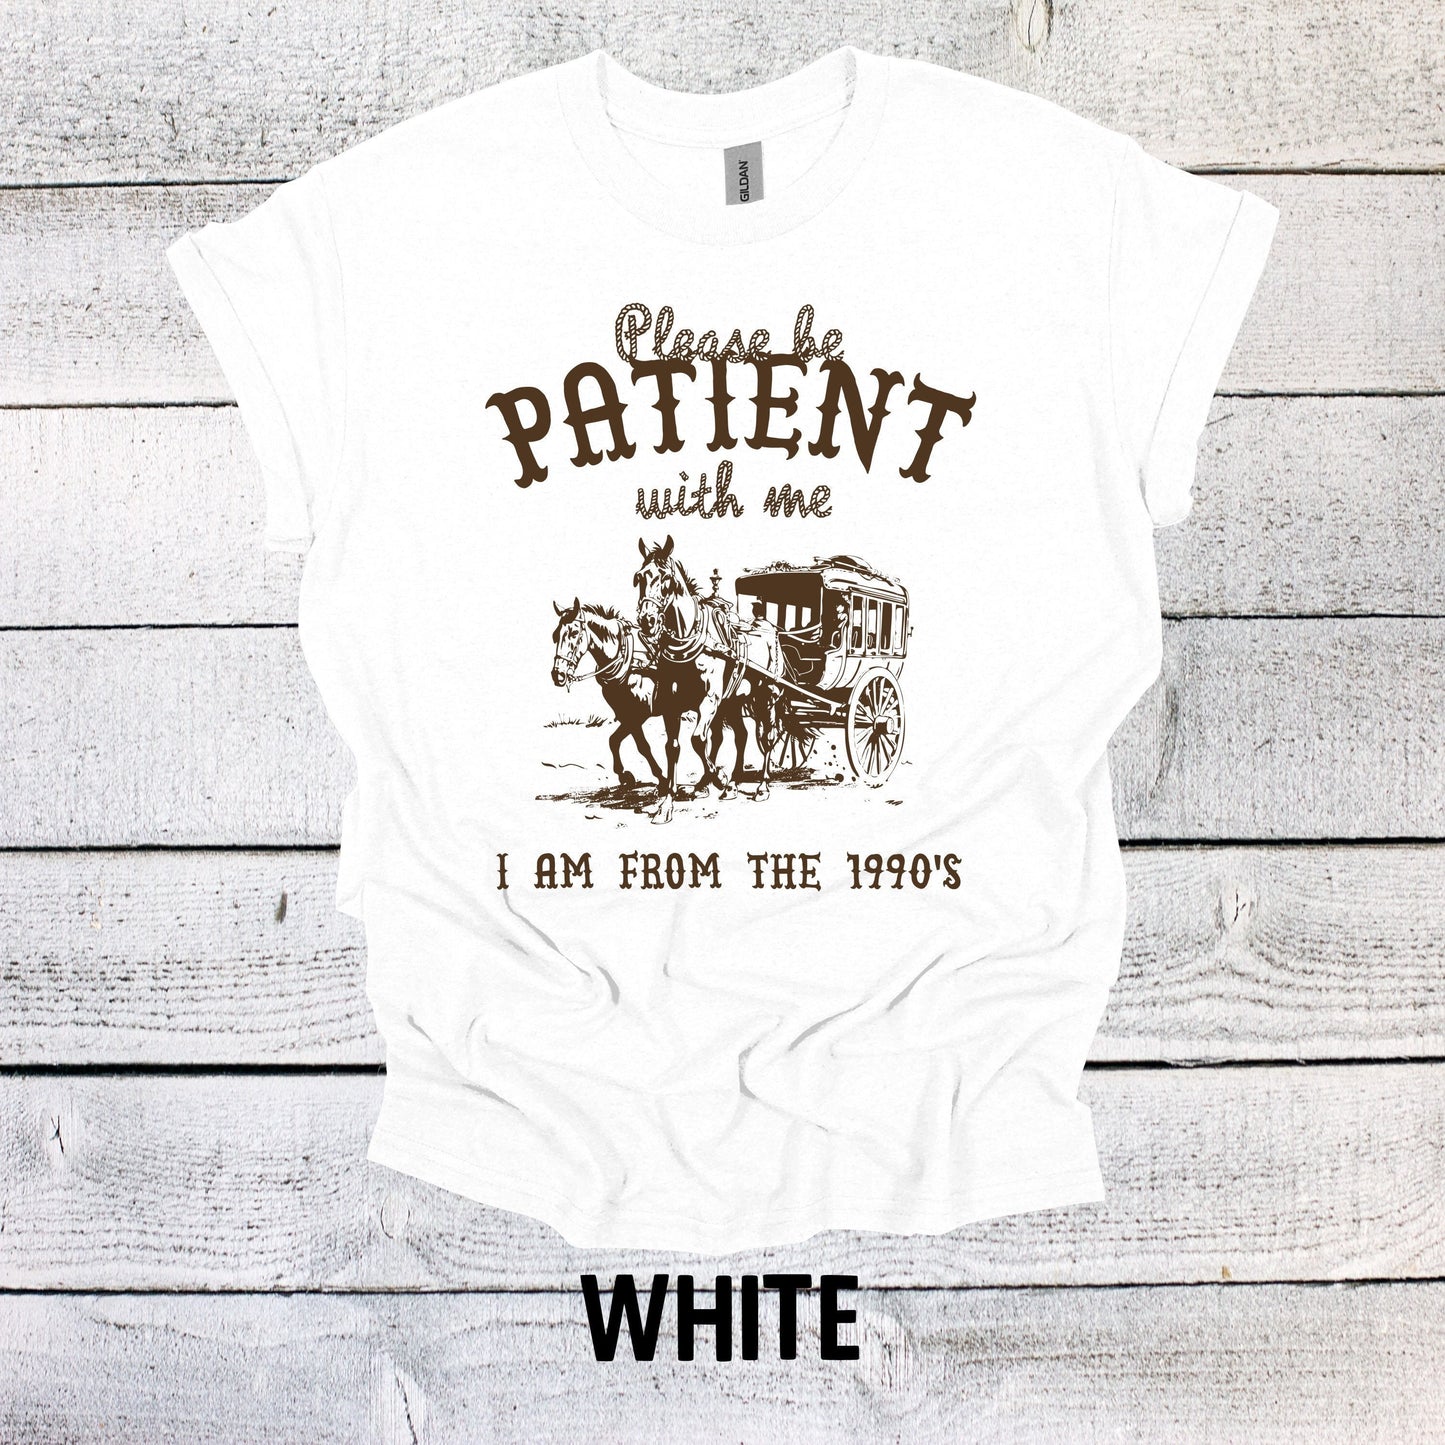 Please Be Patient with me I am from the 1900s Shirt Graphic Shirt Adult Vintage Funny Shirt Nostalgia Cotton Shirt Minimalist Shirt